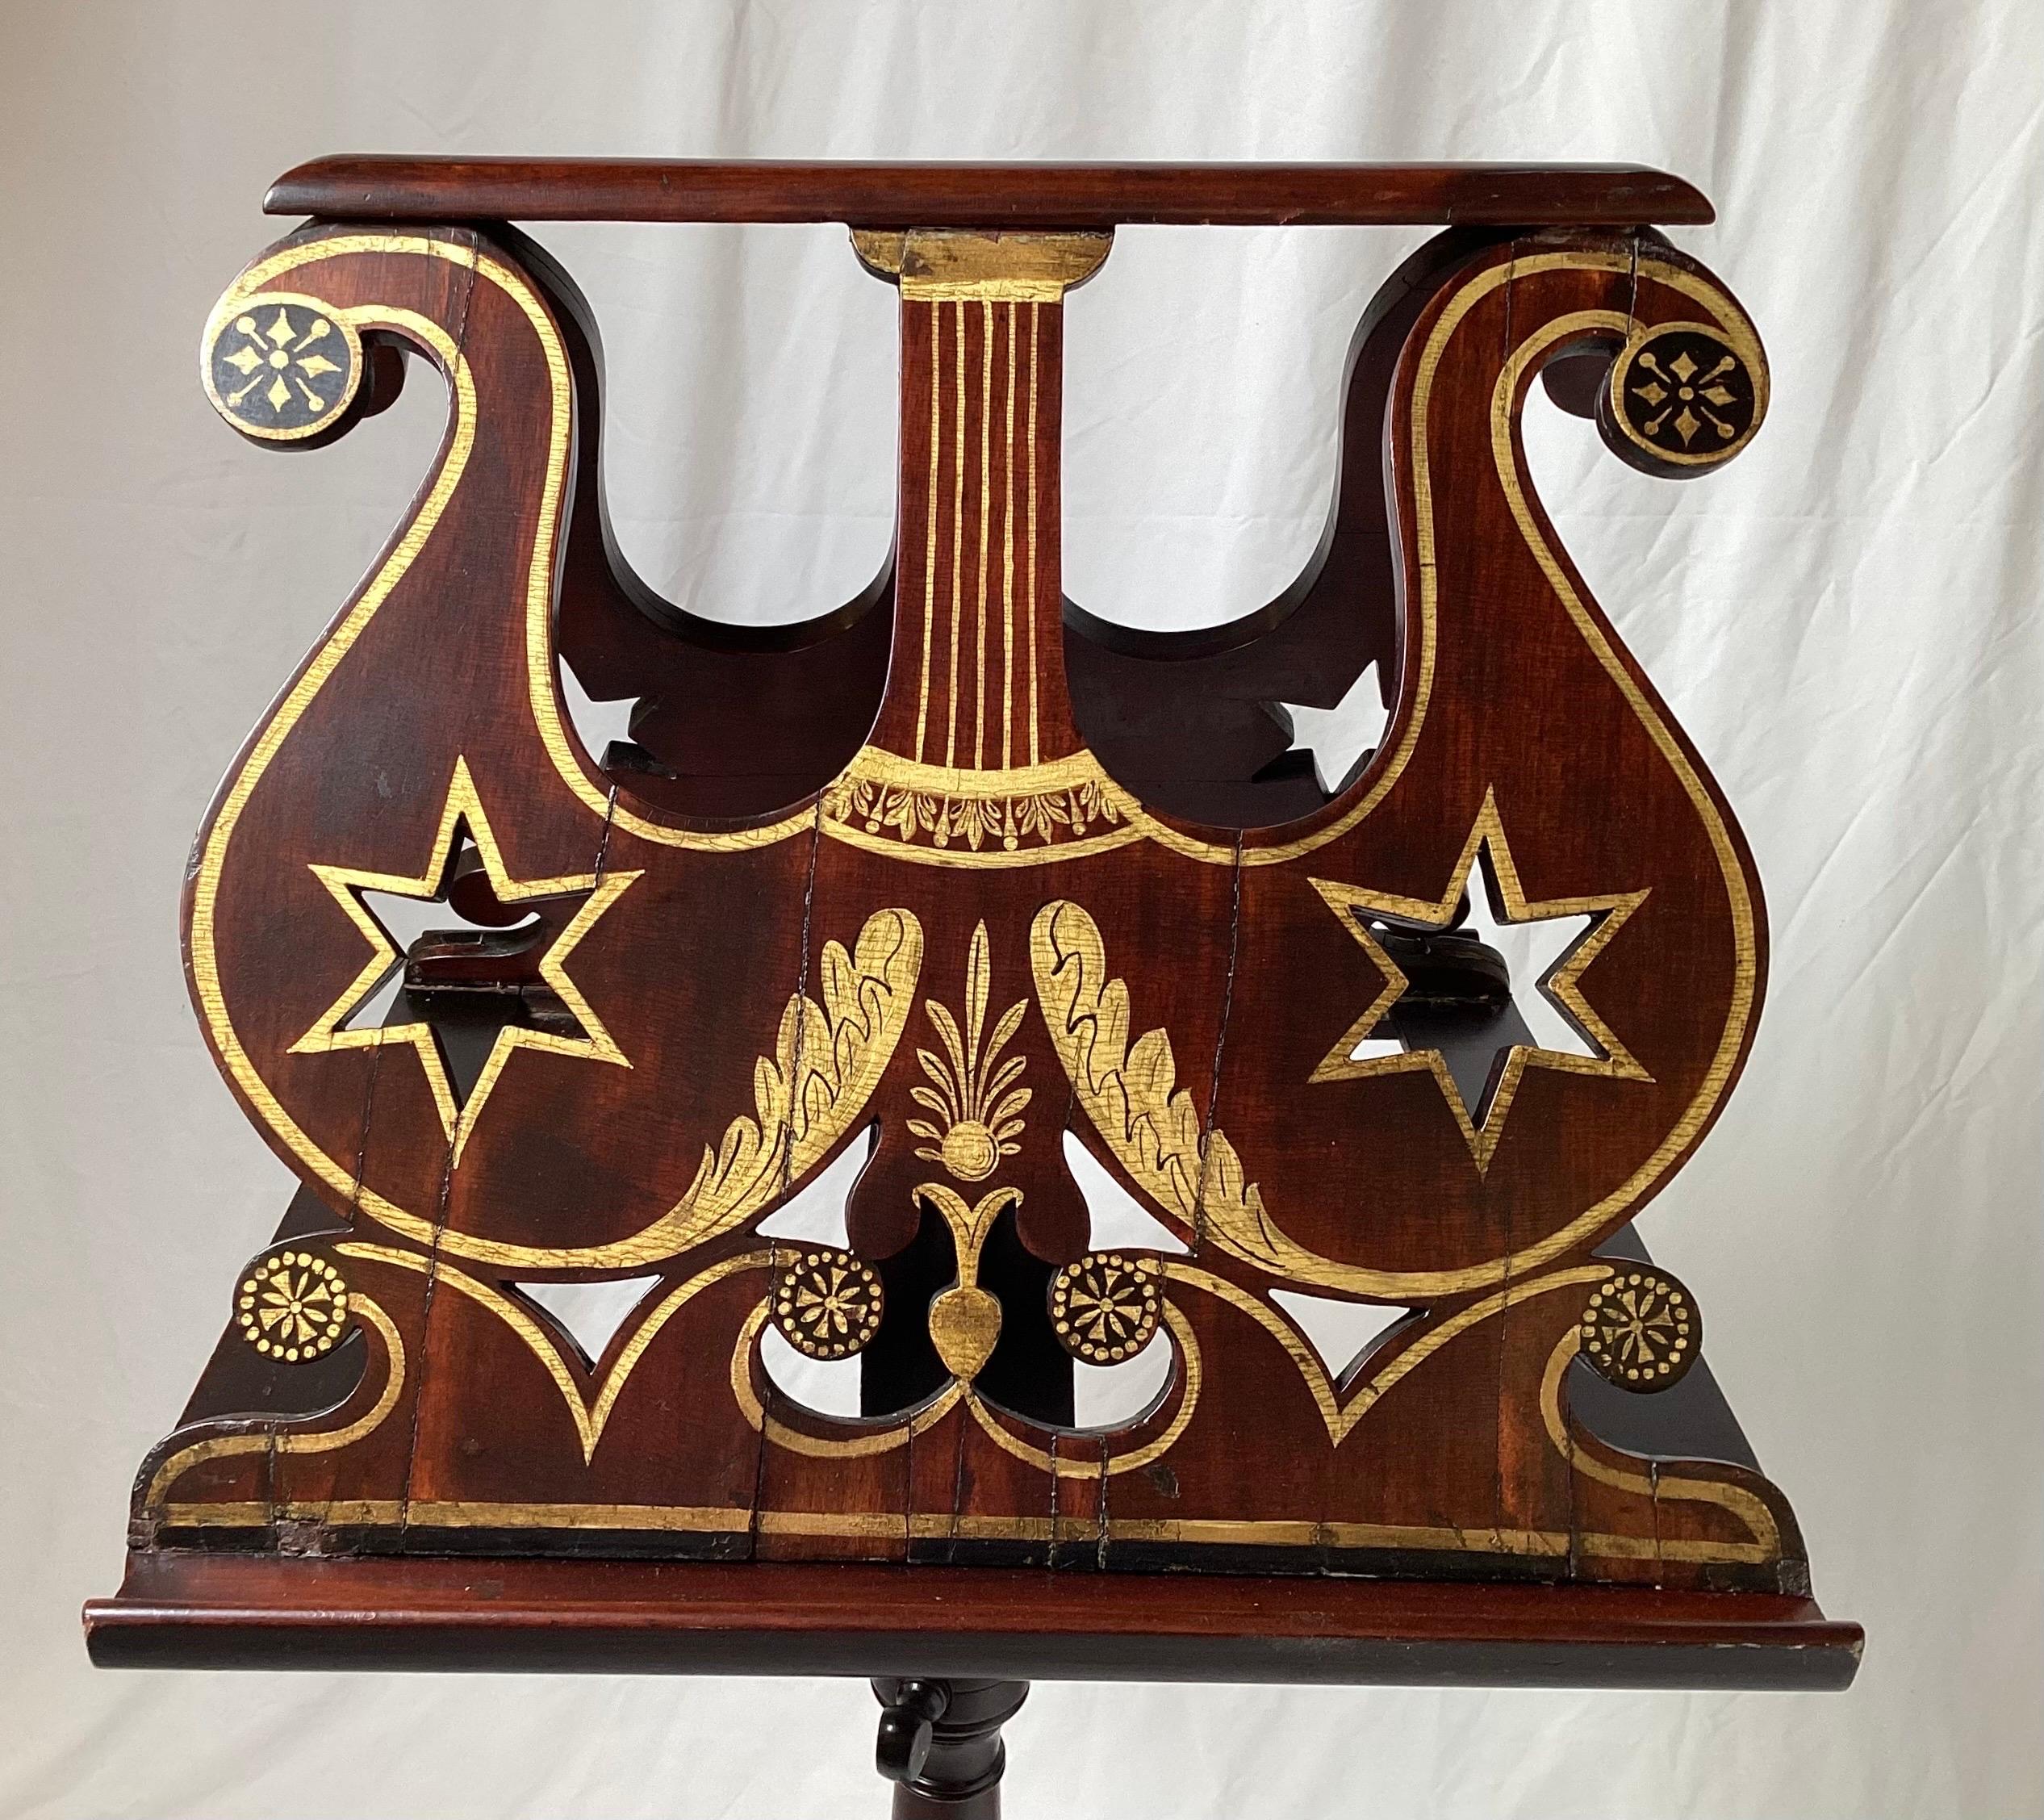 Am American Empire solid mahogany hand carved adjustable music stand with hand painted gilt decoration/ The graceful double sided stand with elaborate gold decoration on an adjustable center column resting on three hand carved empire legs. adjusts